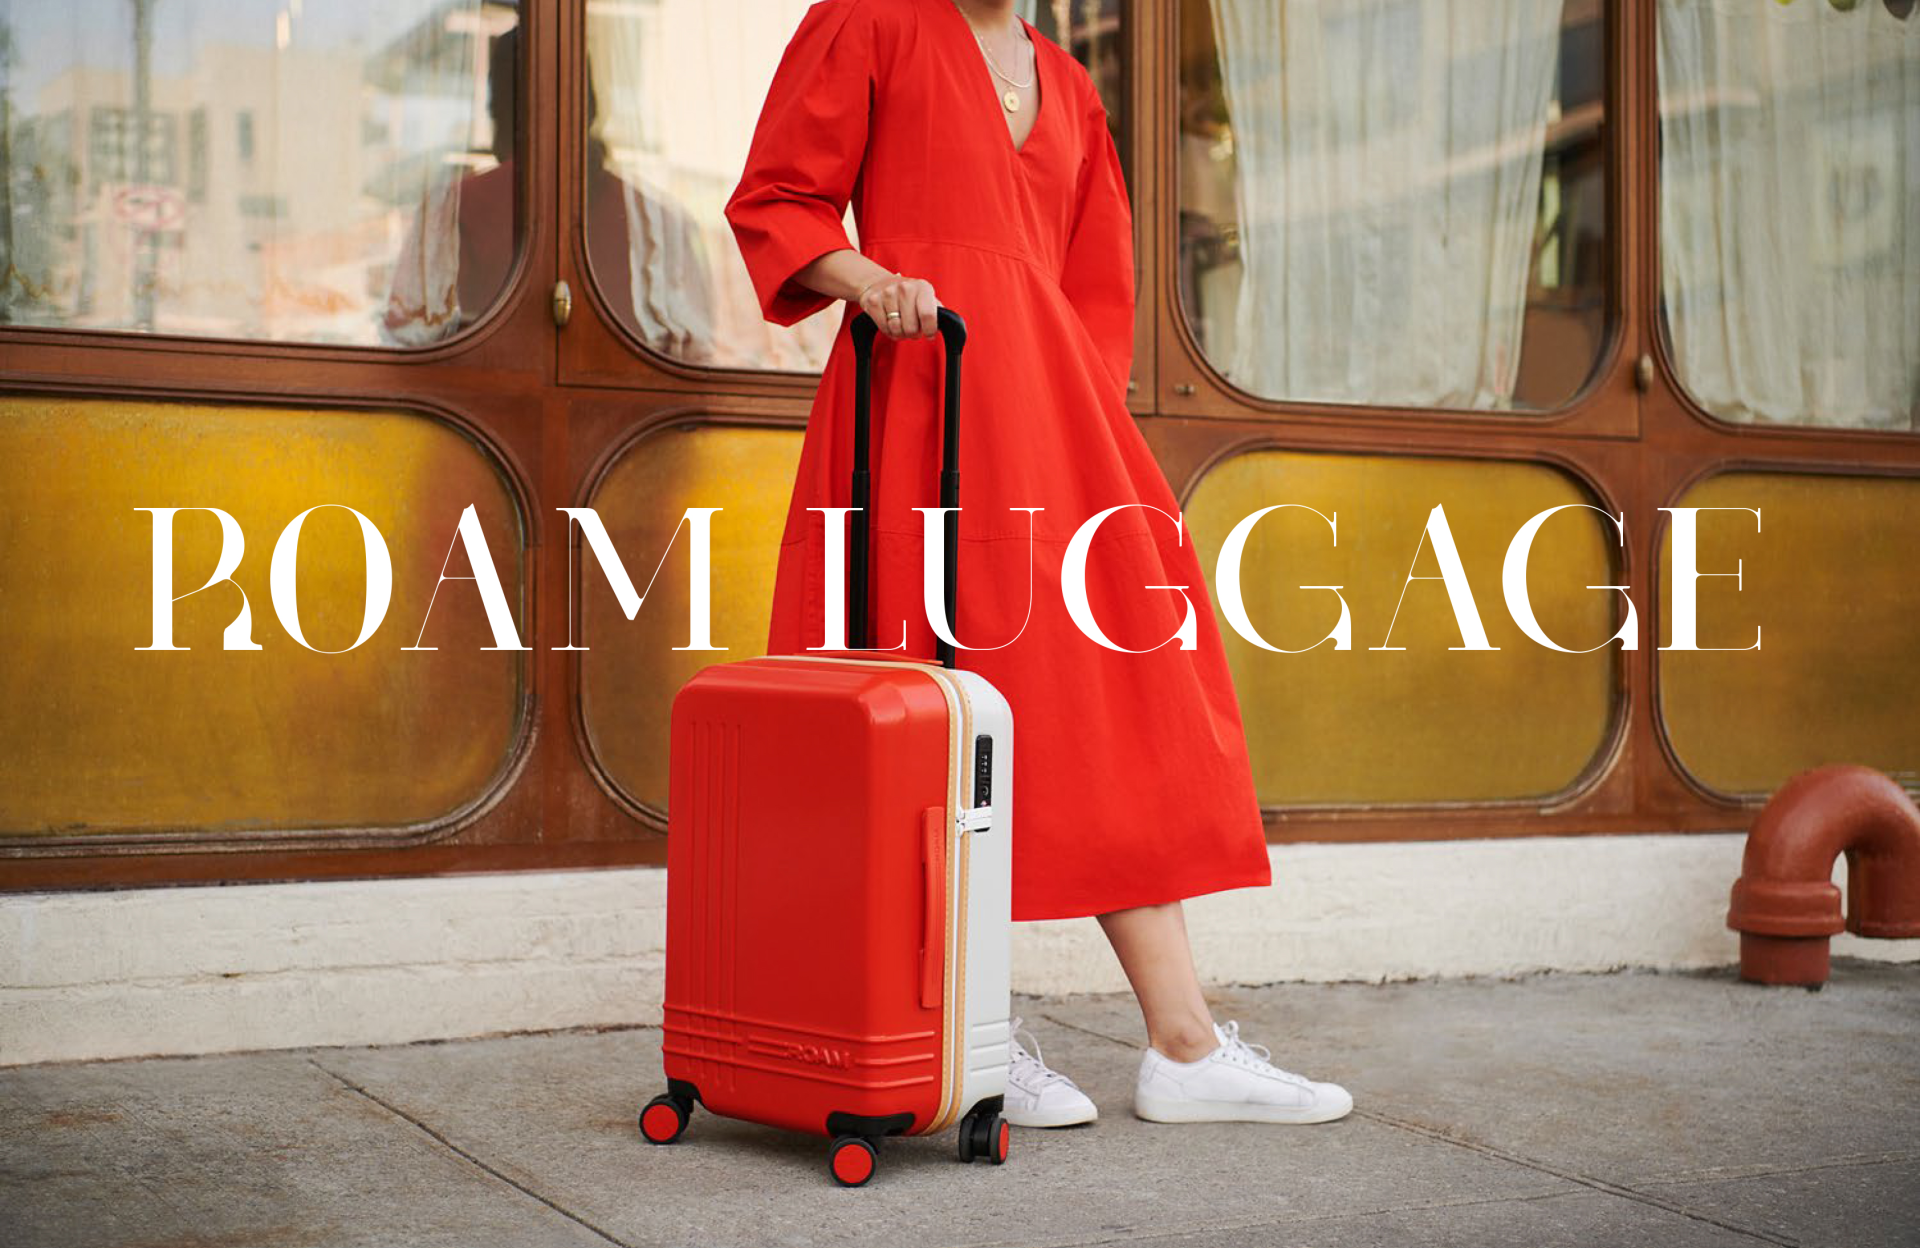 Get To Know ROAM, The Visionary B2C Company Shaking Up The Luggage Industry